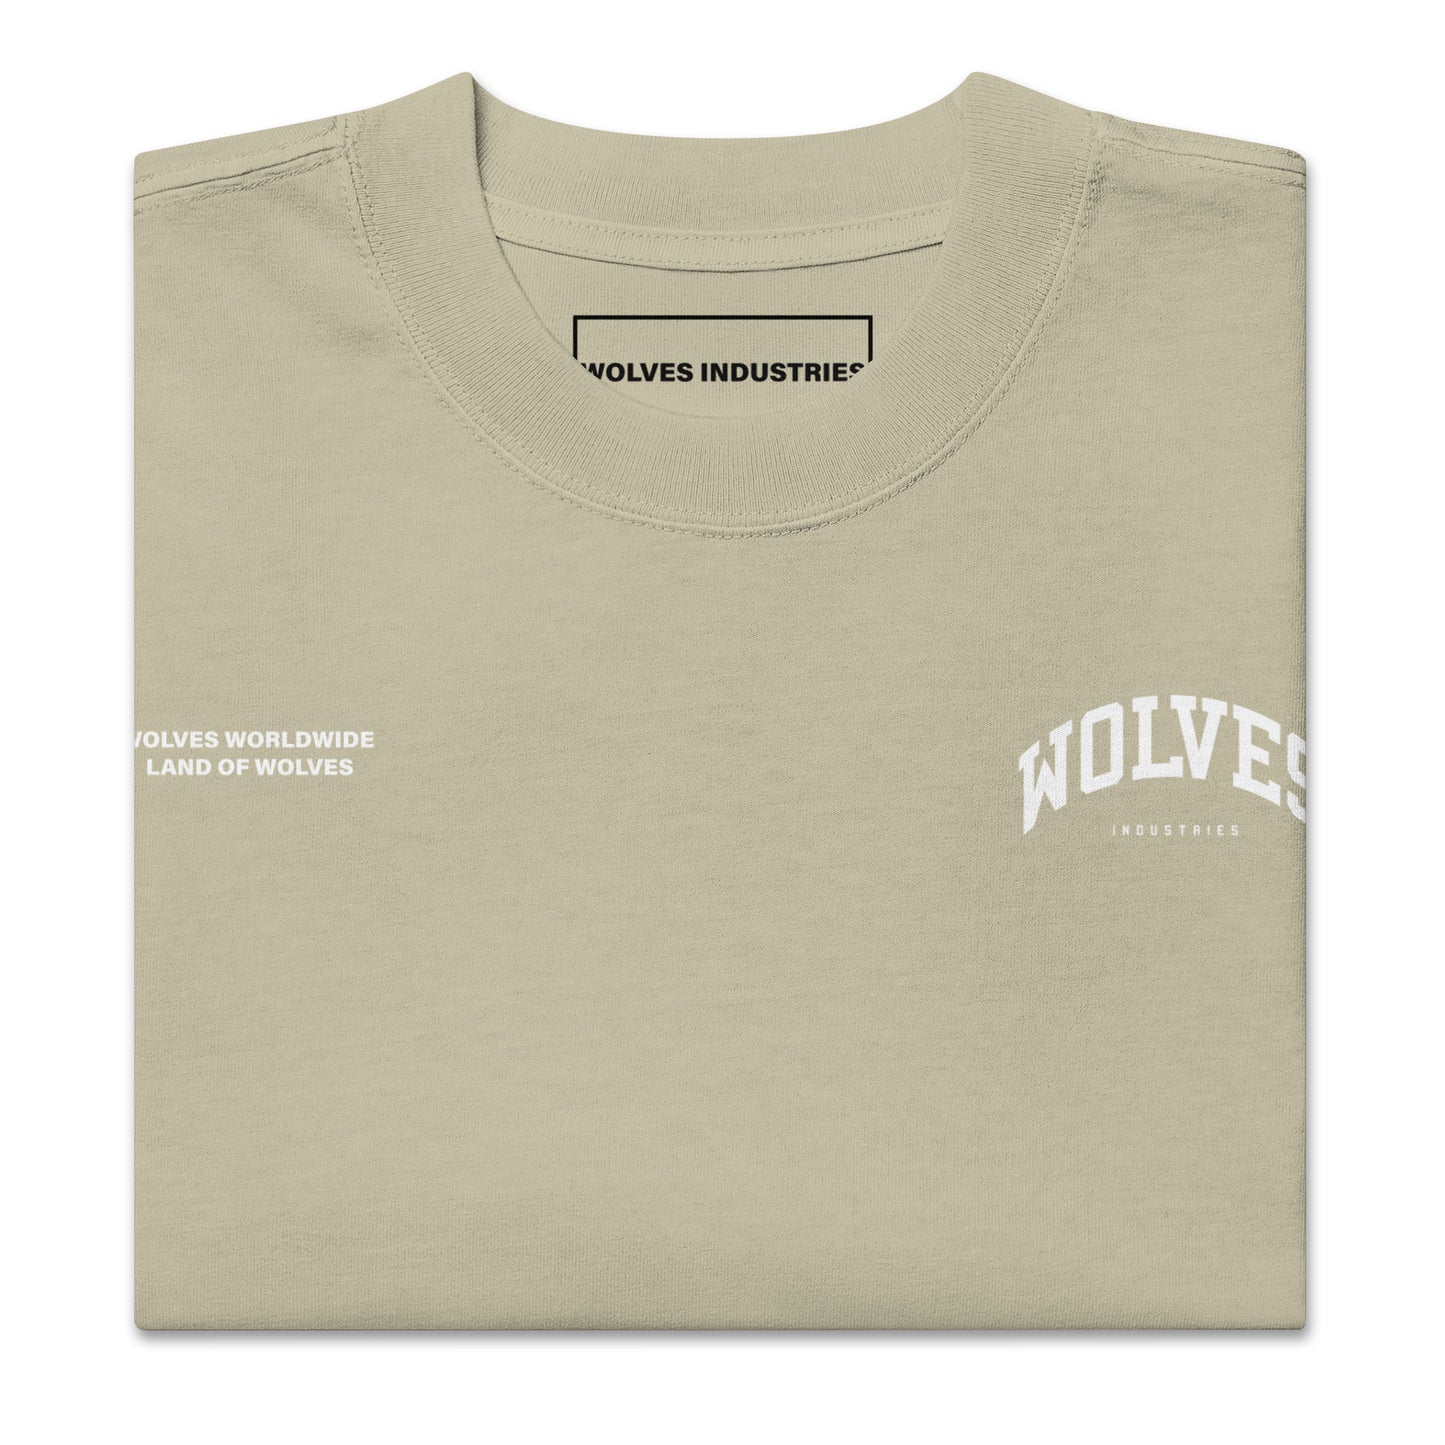 Wolves Industries ABM Oversized faded t-shirt